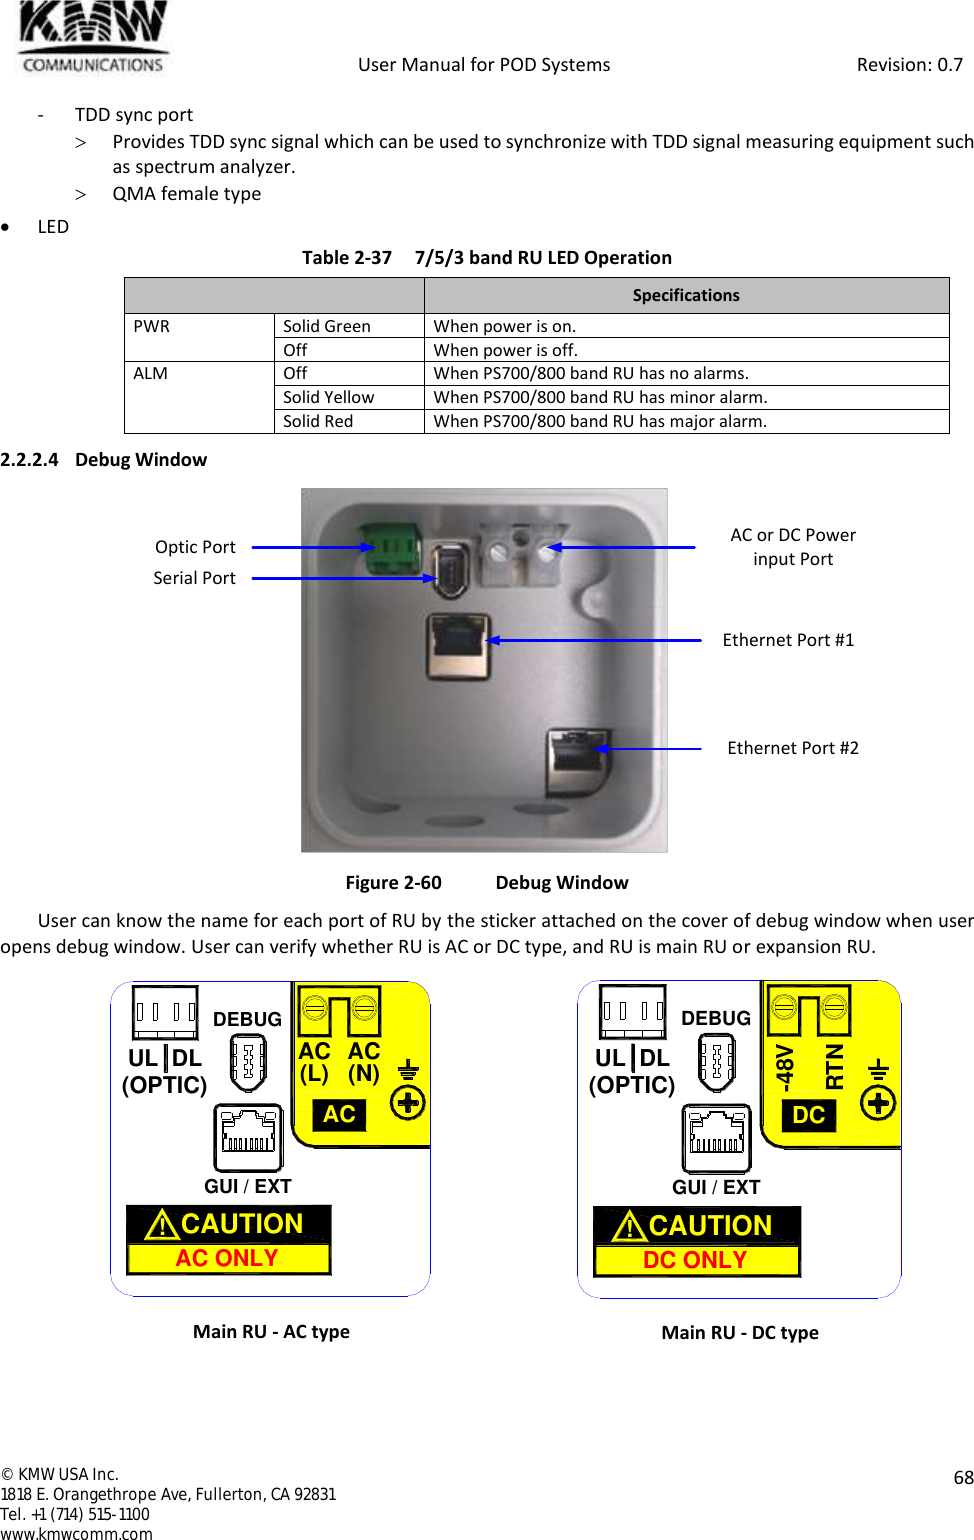            User Manual for POD Systems                                                     Revision: 0.7  ©  KMW USA Inc. 1818 E. Orangethrope Ave, Fullerton, CA 92831 Tel. +1 (714) 515-1100 www.kmwcomm.com  68  - TDD sync port  Provides TDD sync signal which can be used to synchronize with TDD signal measuring equipment such as spectrum analyzer.  QMA female type  LED Table 2-37  7/5/3 band RU LED Operation  Specifications PWR Solid Green When power is on. Off When power is off. ALM Off When PS700/800 band RU has no alarms. Solid Yellow When PS700/800 band RU has minor alarm. Solid Red When PS700/800 band RU has major alarm. 2.2.2.4 Debug Window  Figure 2-60  Debug Window User can know the name for each port of RU by the sticker attached on the cover of debug window when user opens debug window. User can verify whether RU is AC or DC type, and RU is main RU or expansion RU.  Main RU - AC type  Main RU - DC type Optic Port AC or DC Power input PortSerial PortEthernet Port #1Ethernet Port #2GUI / EXTDEBUGUL DL(OPTIC)AC(L) AC(N)ACAC ONLYCAUTION  !DEBUGGUI / EXTUL DL(OPTIC)RTN-48VDCDC ONLYCAUTION  !